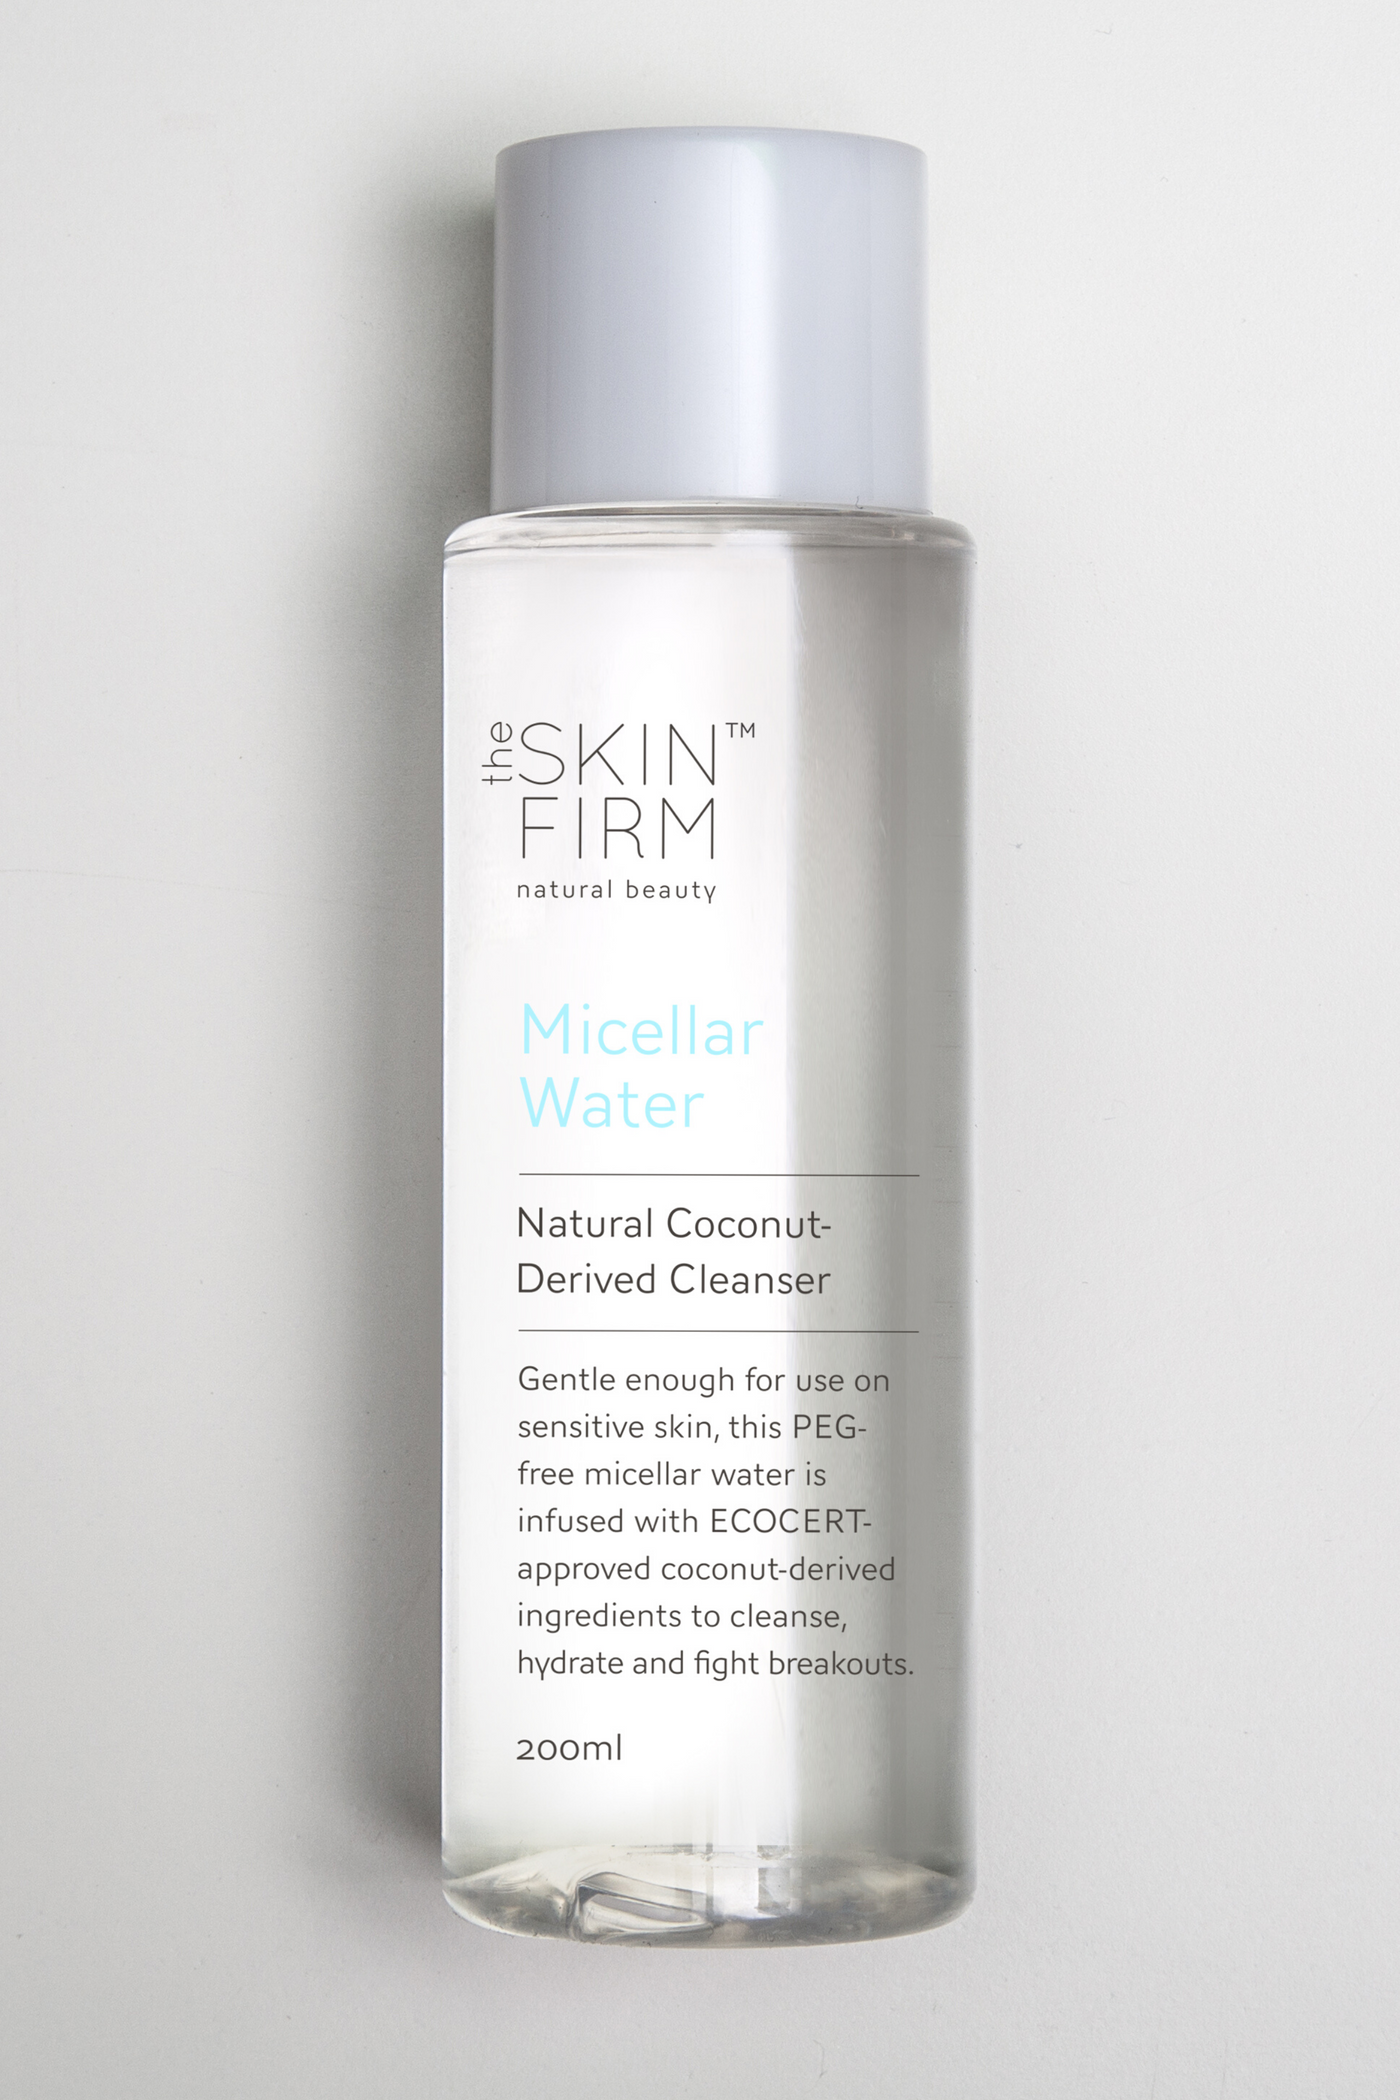 The Skin Firm Natural Micellar Water